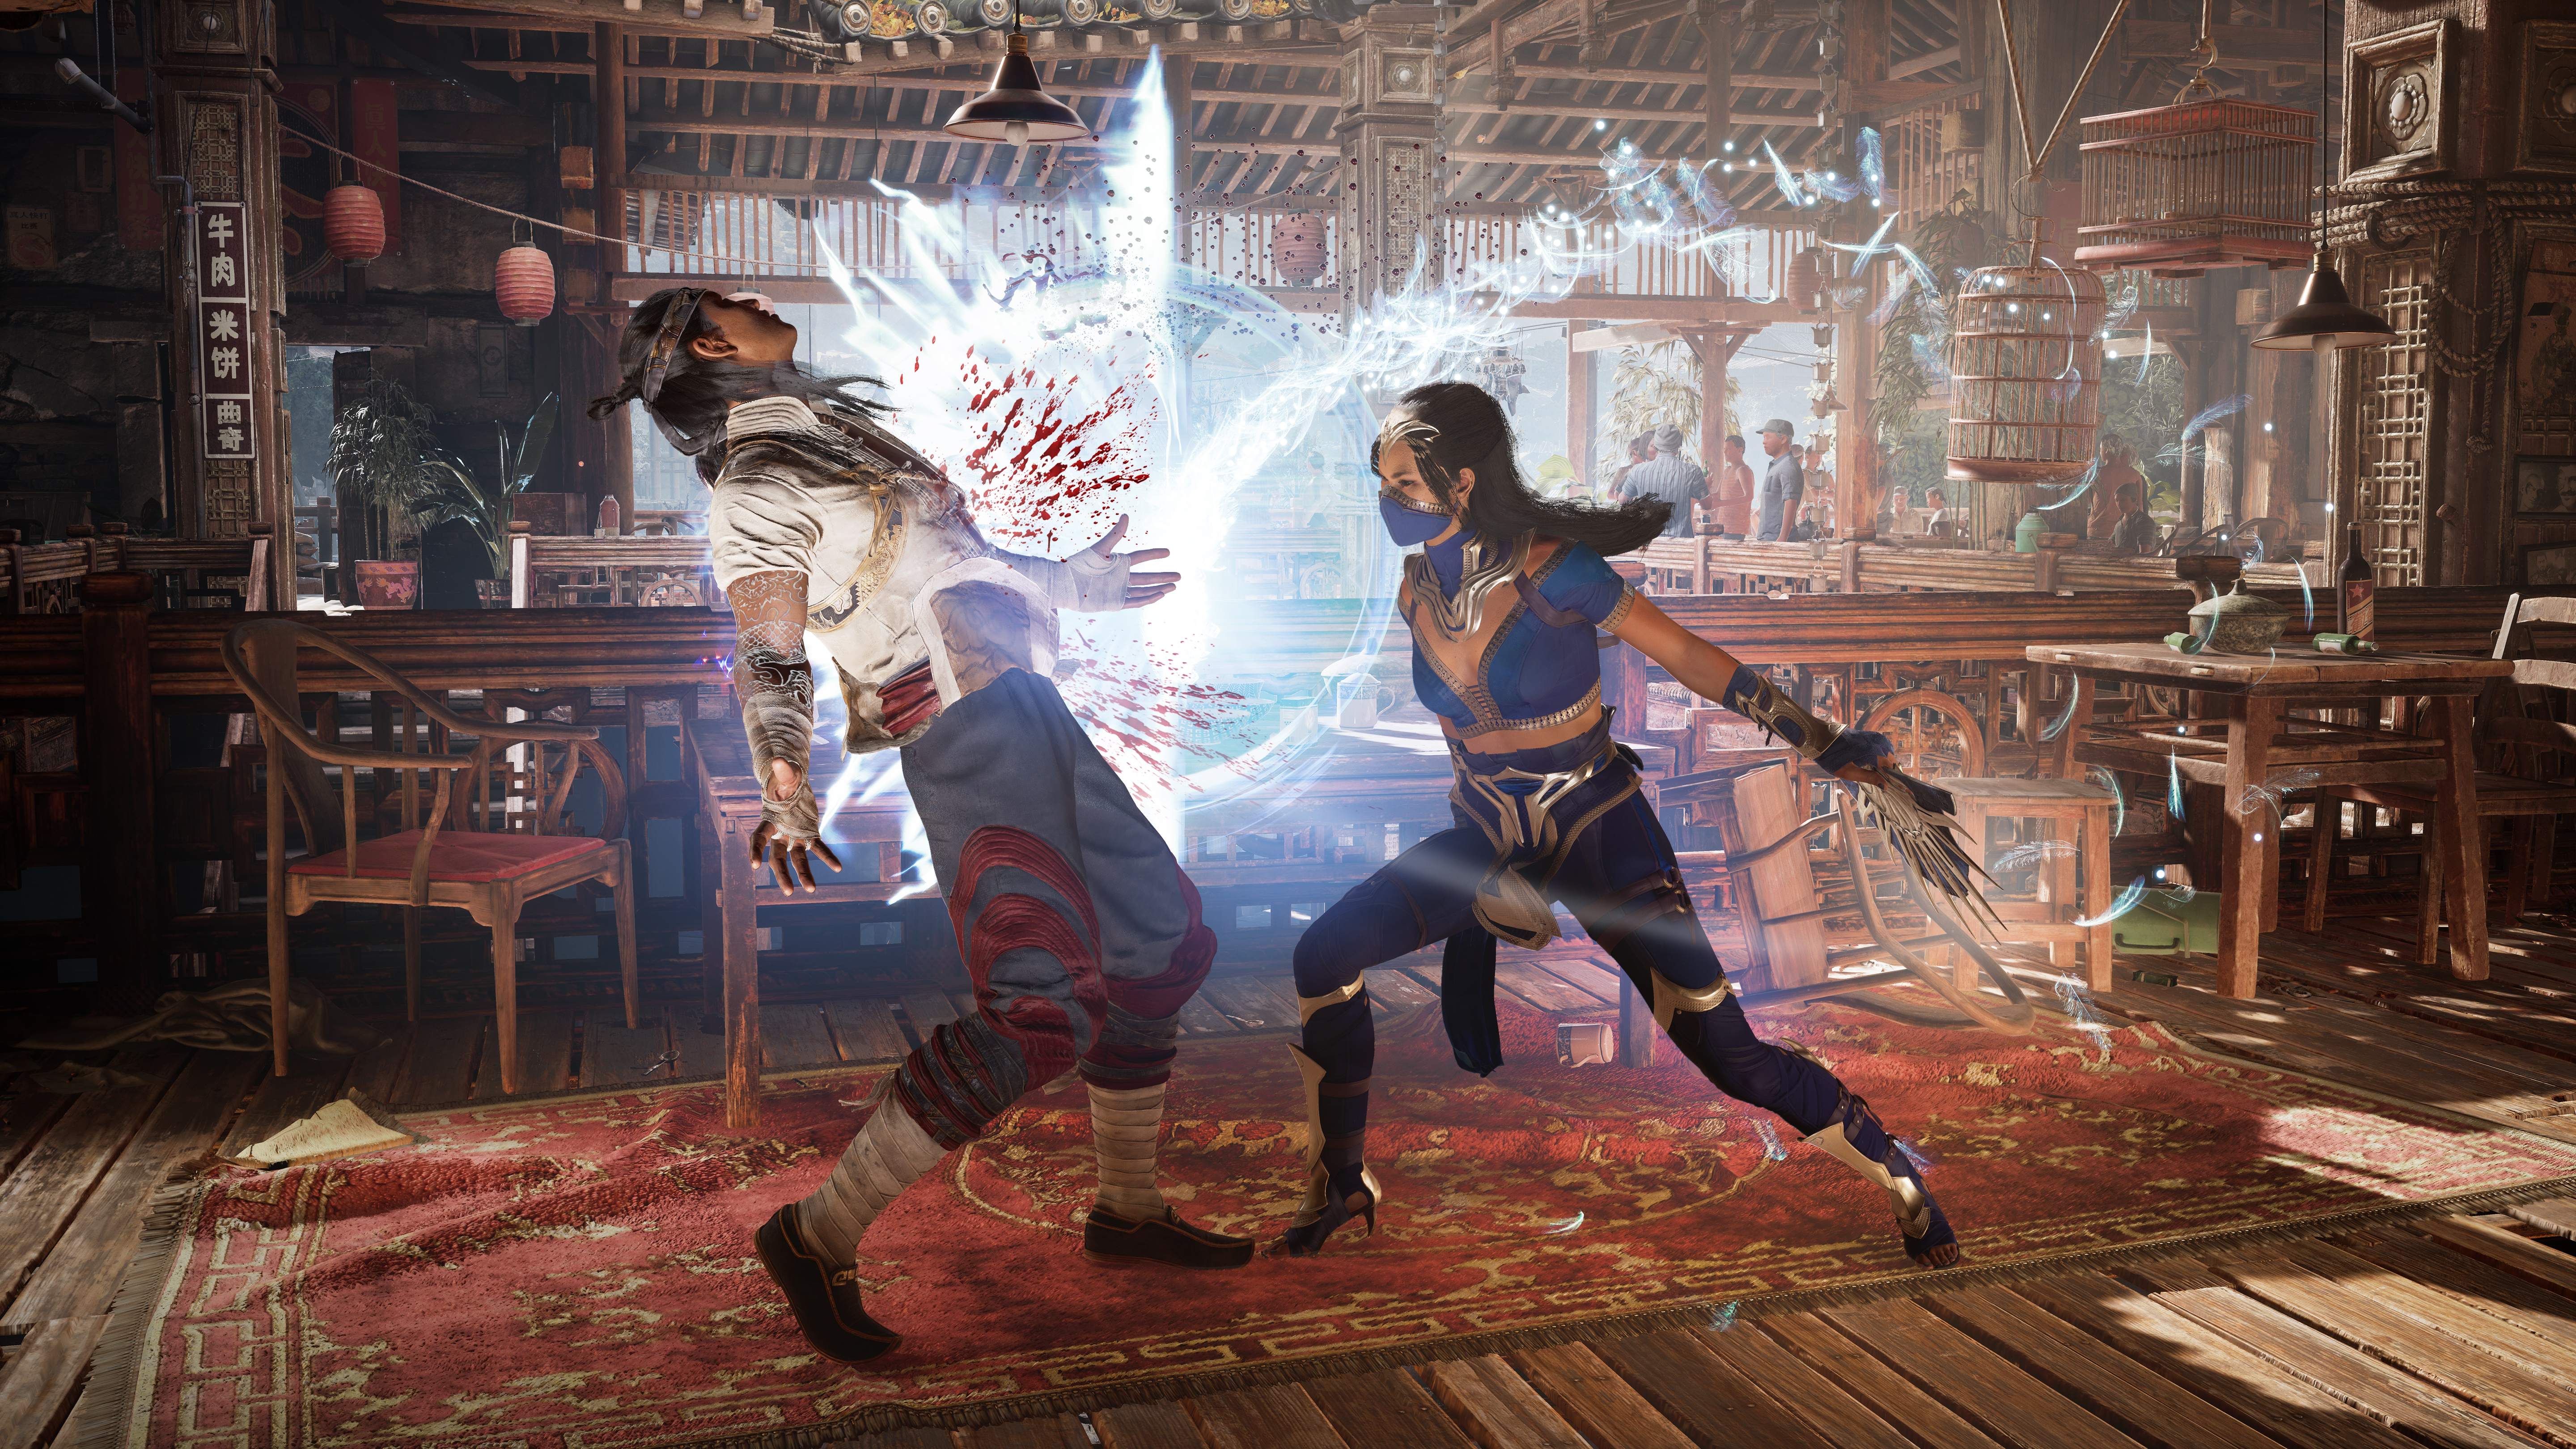 Mortal Kombat 1 is Official: Release Date, Trailer, and First